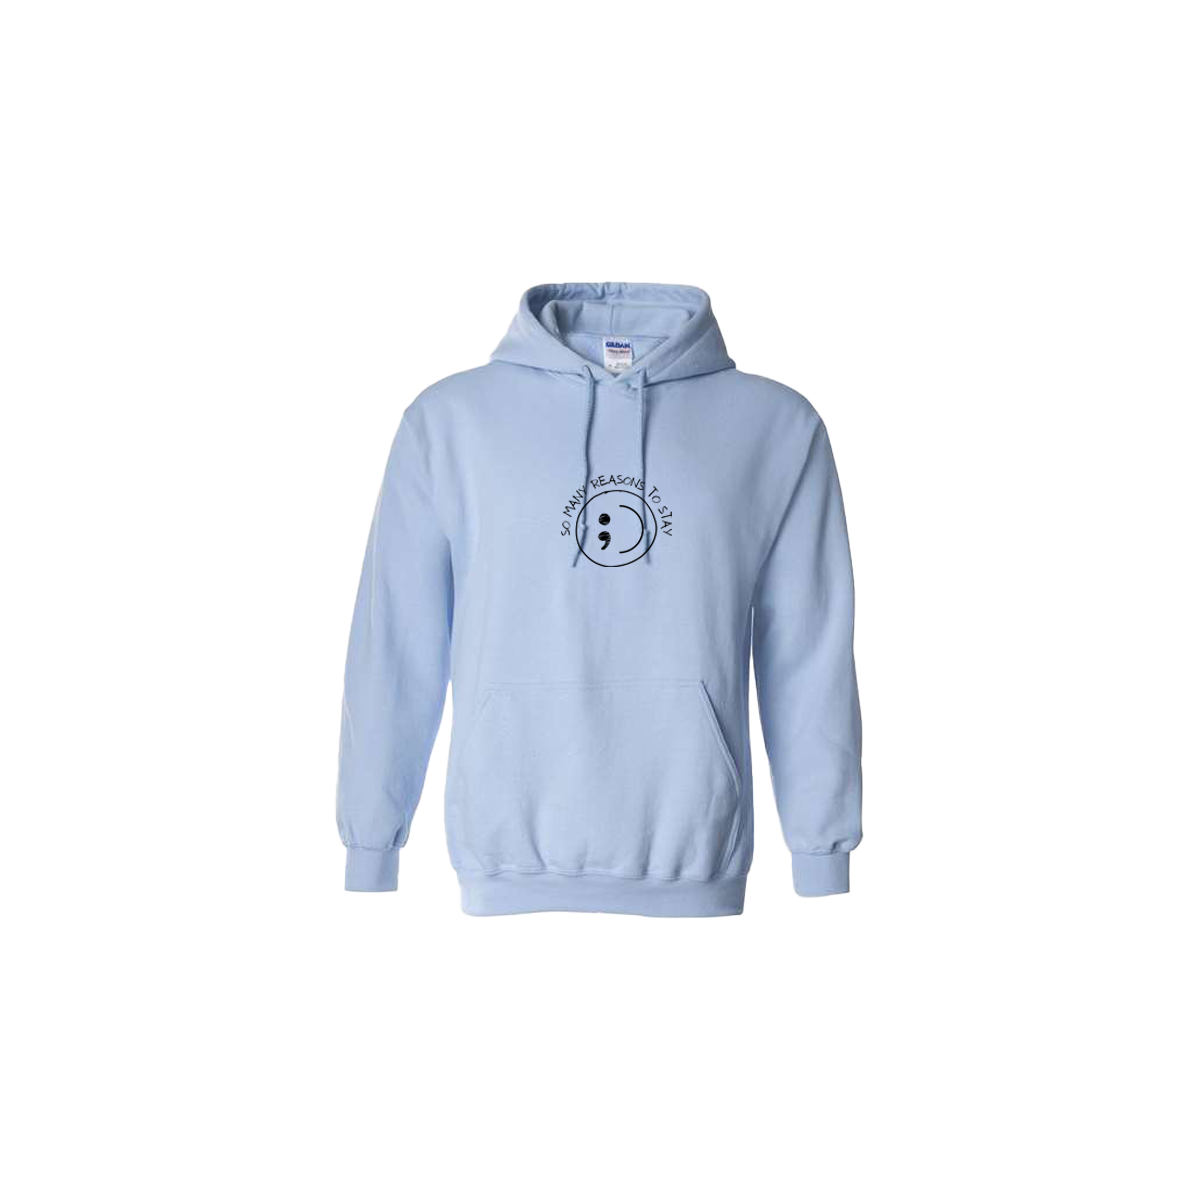 So Many Reasons to Stay Embroidered Light Blue Hoodie - Mental Health Awareness Clothing